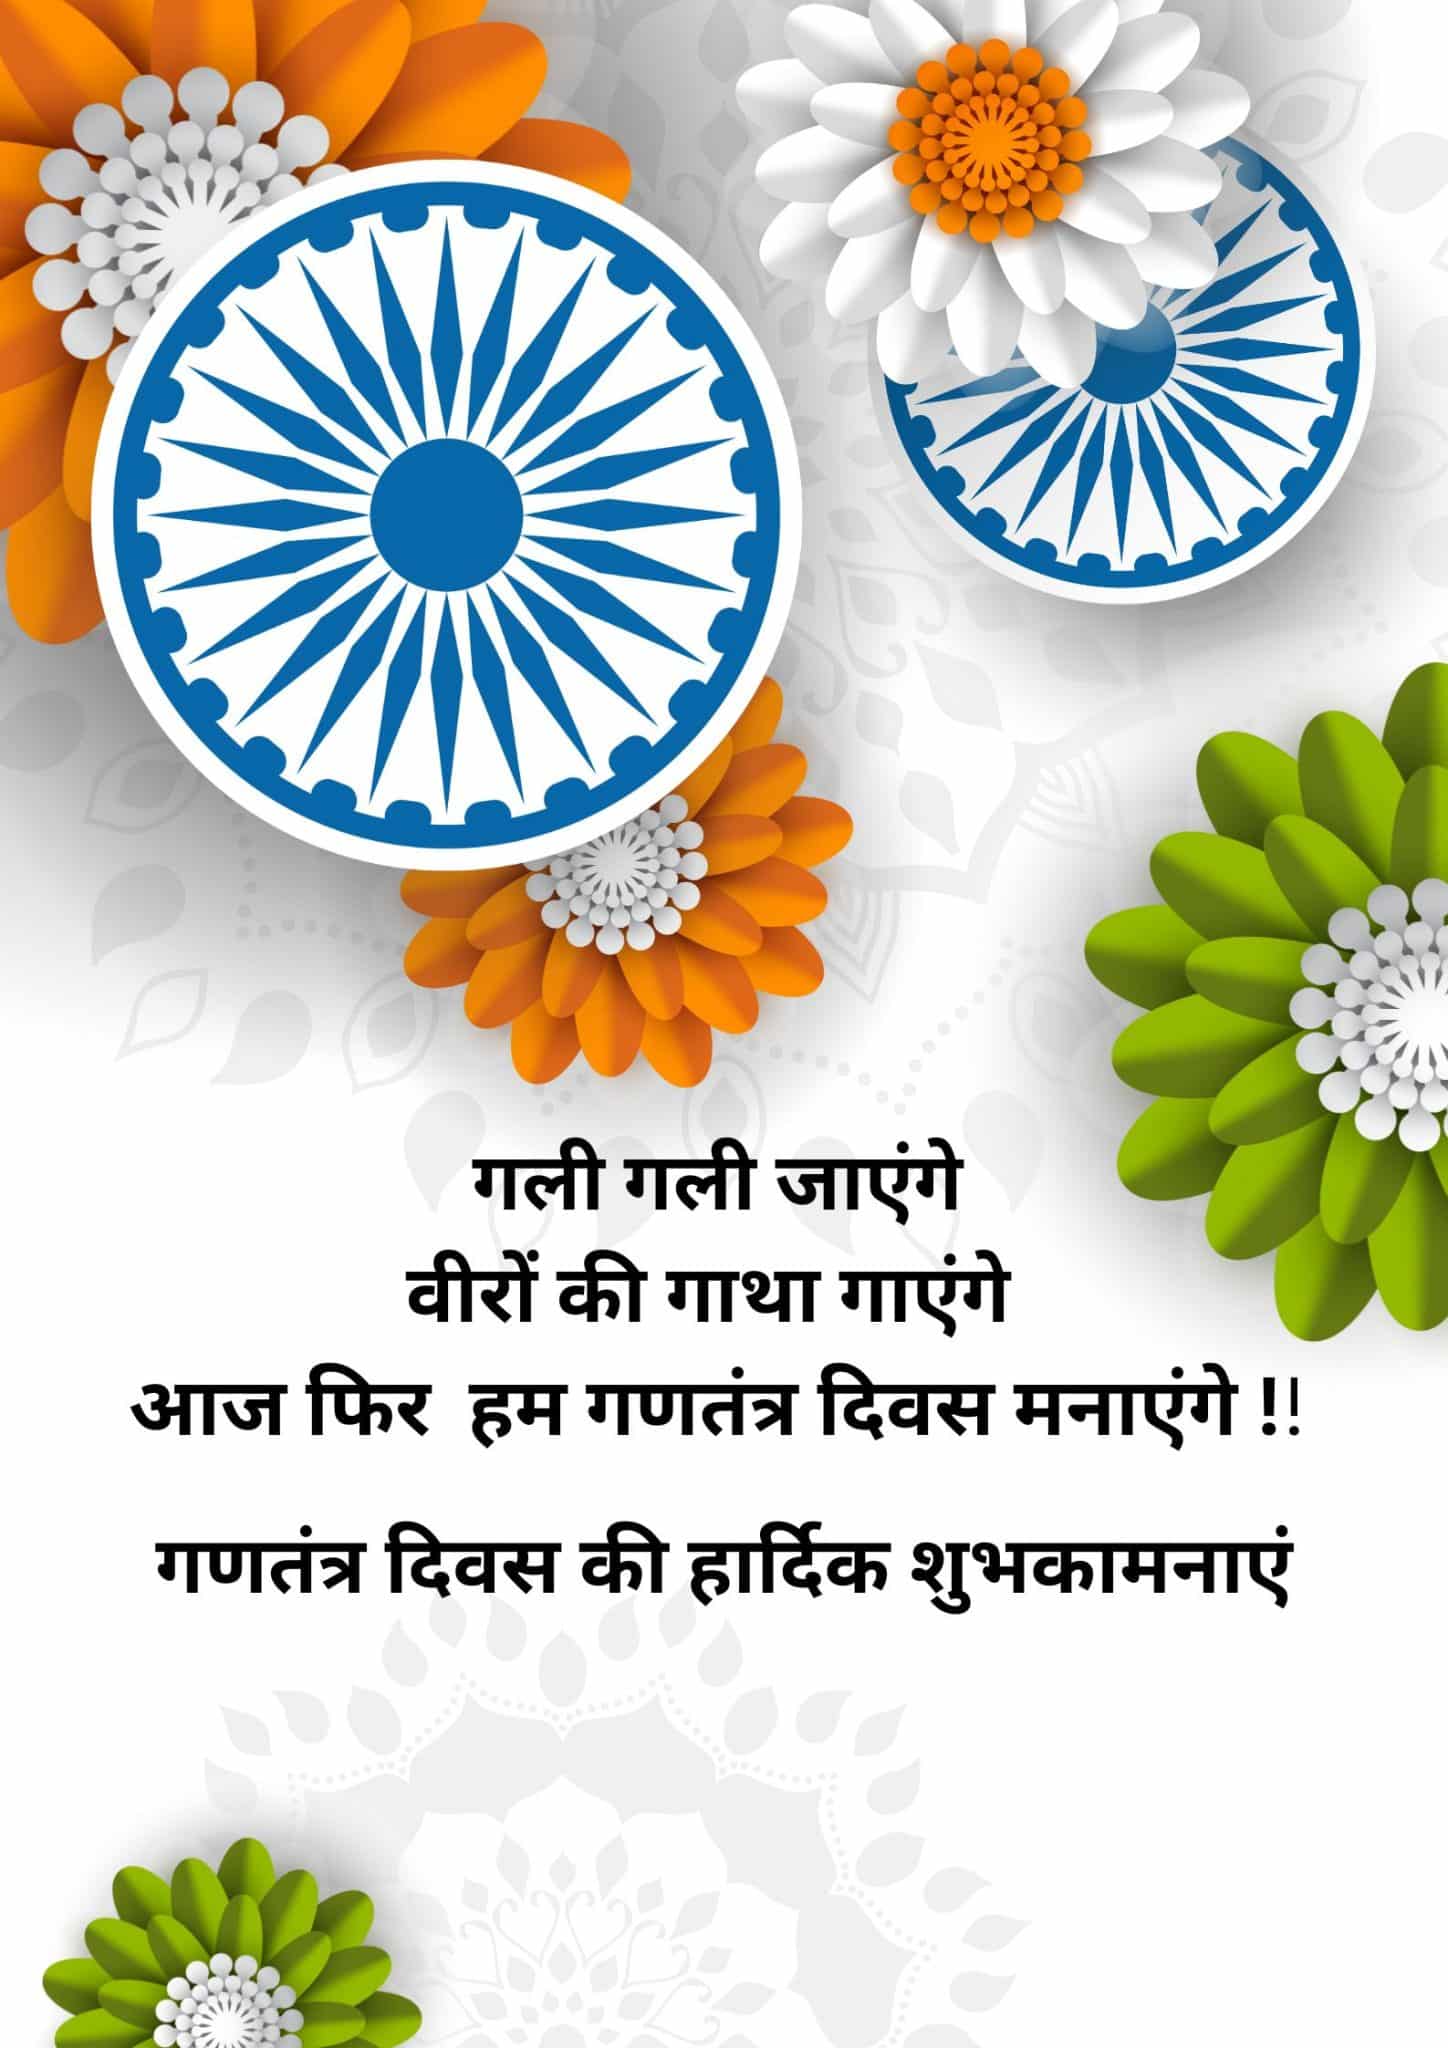 Happy Republic Day Wishes Images, 26th January 2022 Wishes